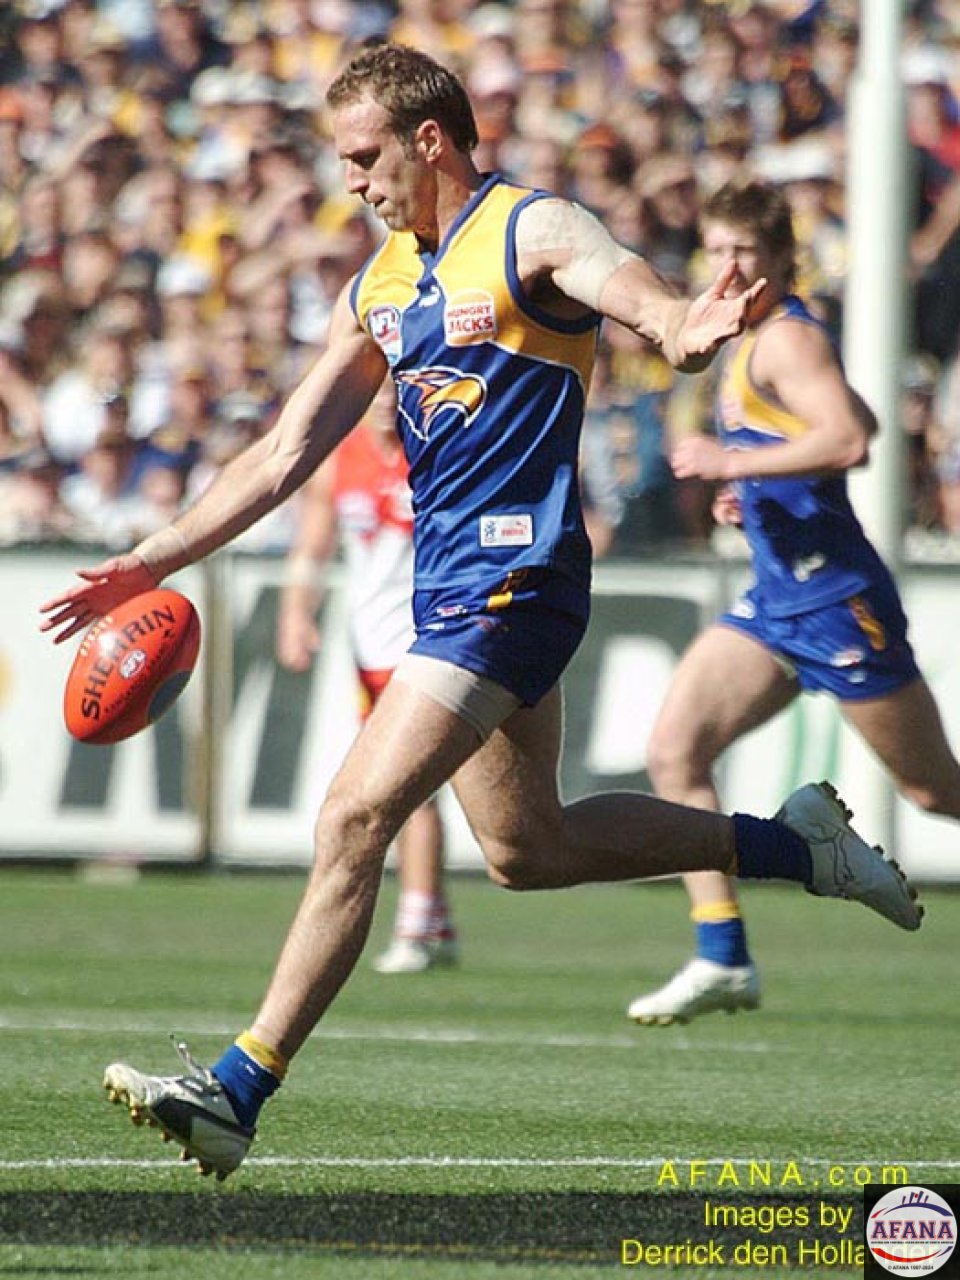 [b]West Coast Eagles captain and former Brownlow Medallist Chris Judd about to deliver a kicked pass[/b]